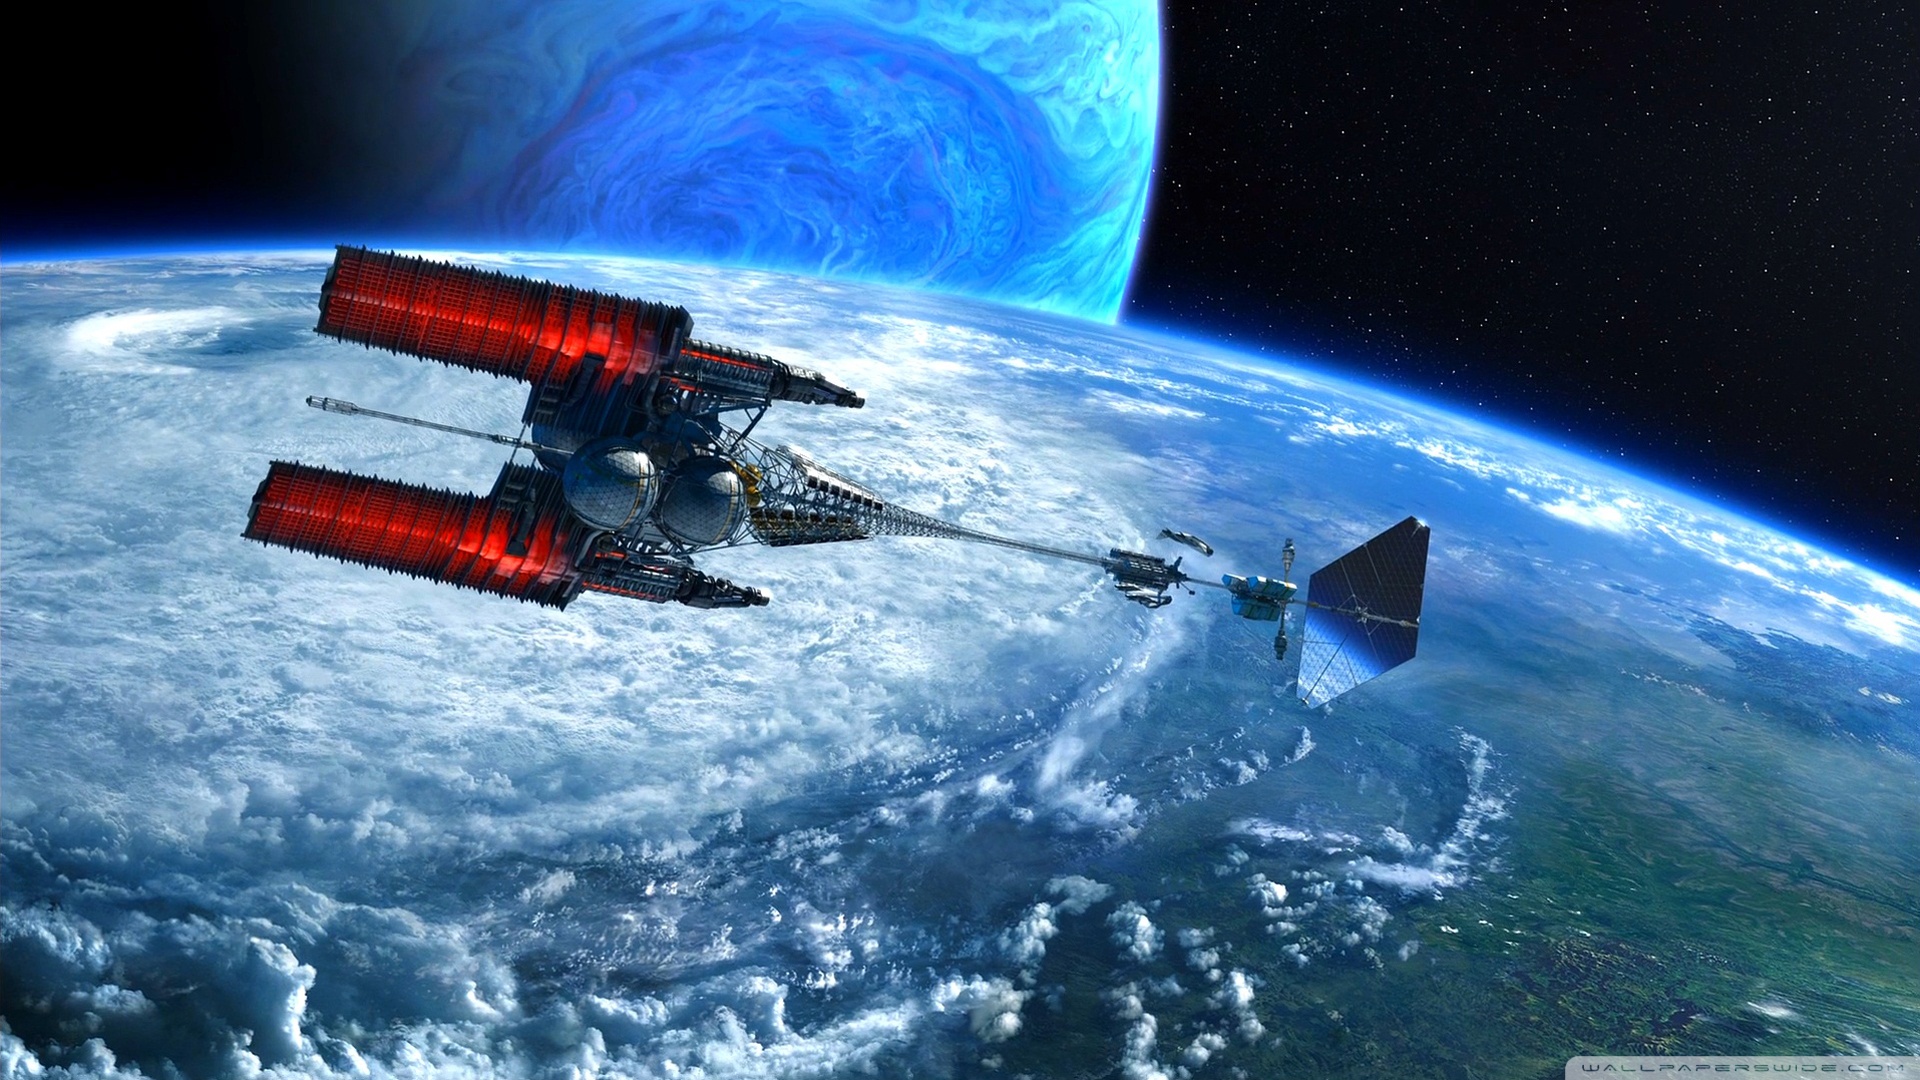 General 1920x1080 space station Pandora Avatar space science fiction